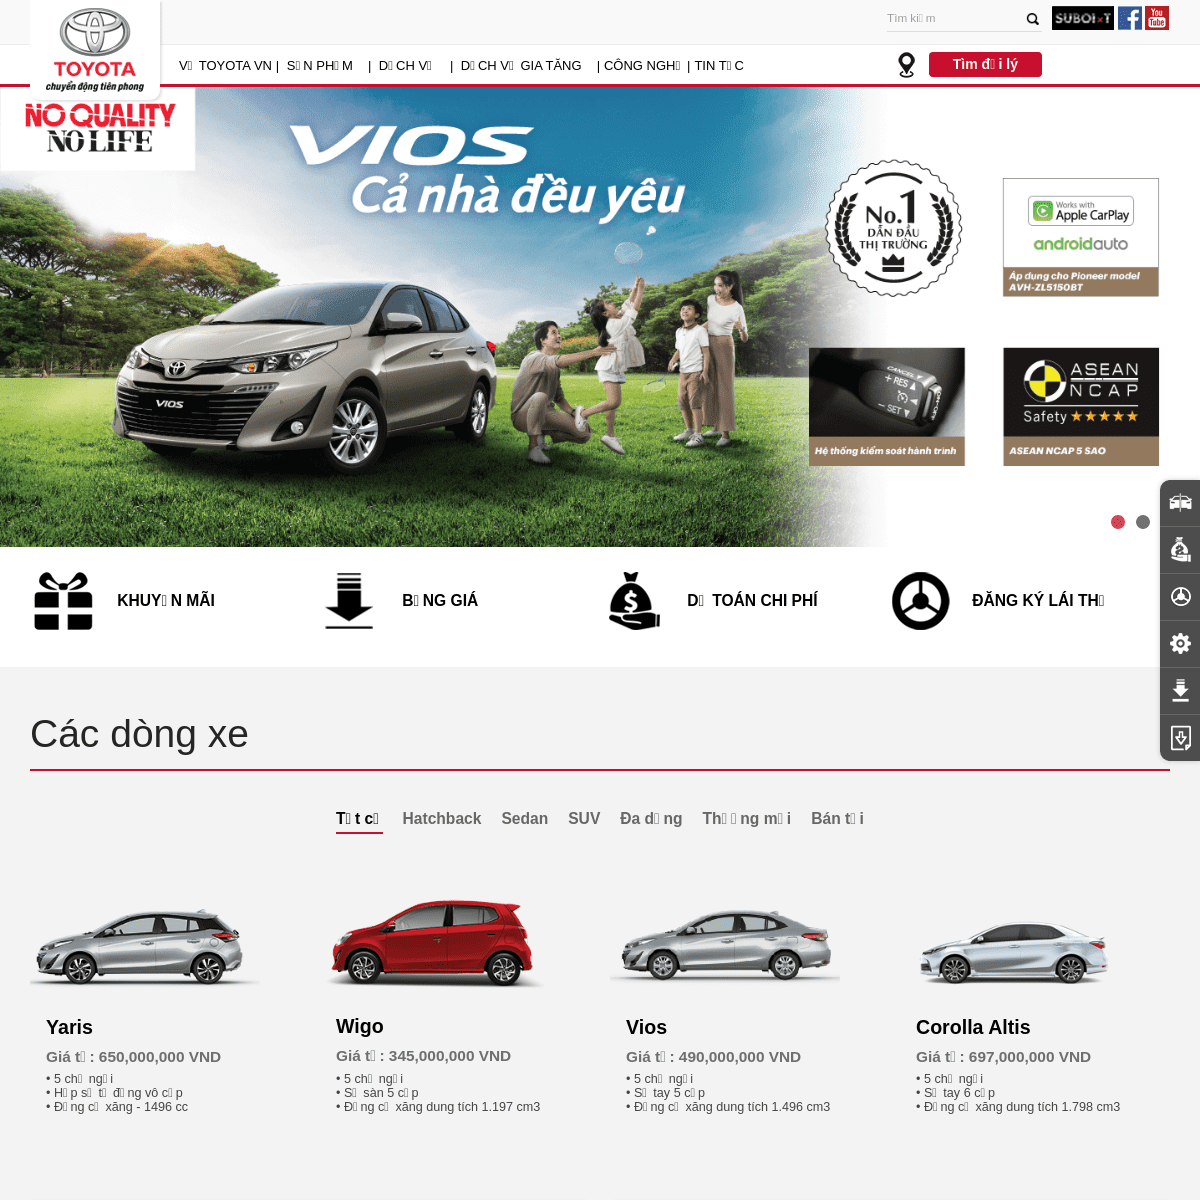 A complete backup of toyota.com.vn